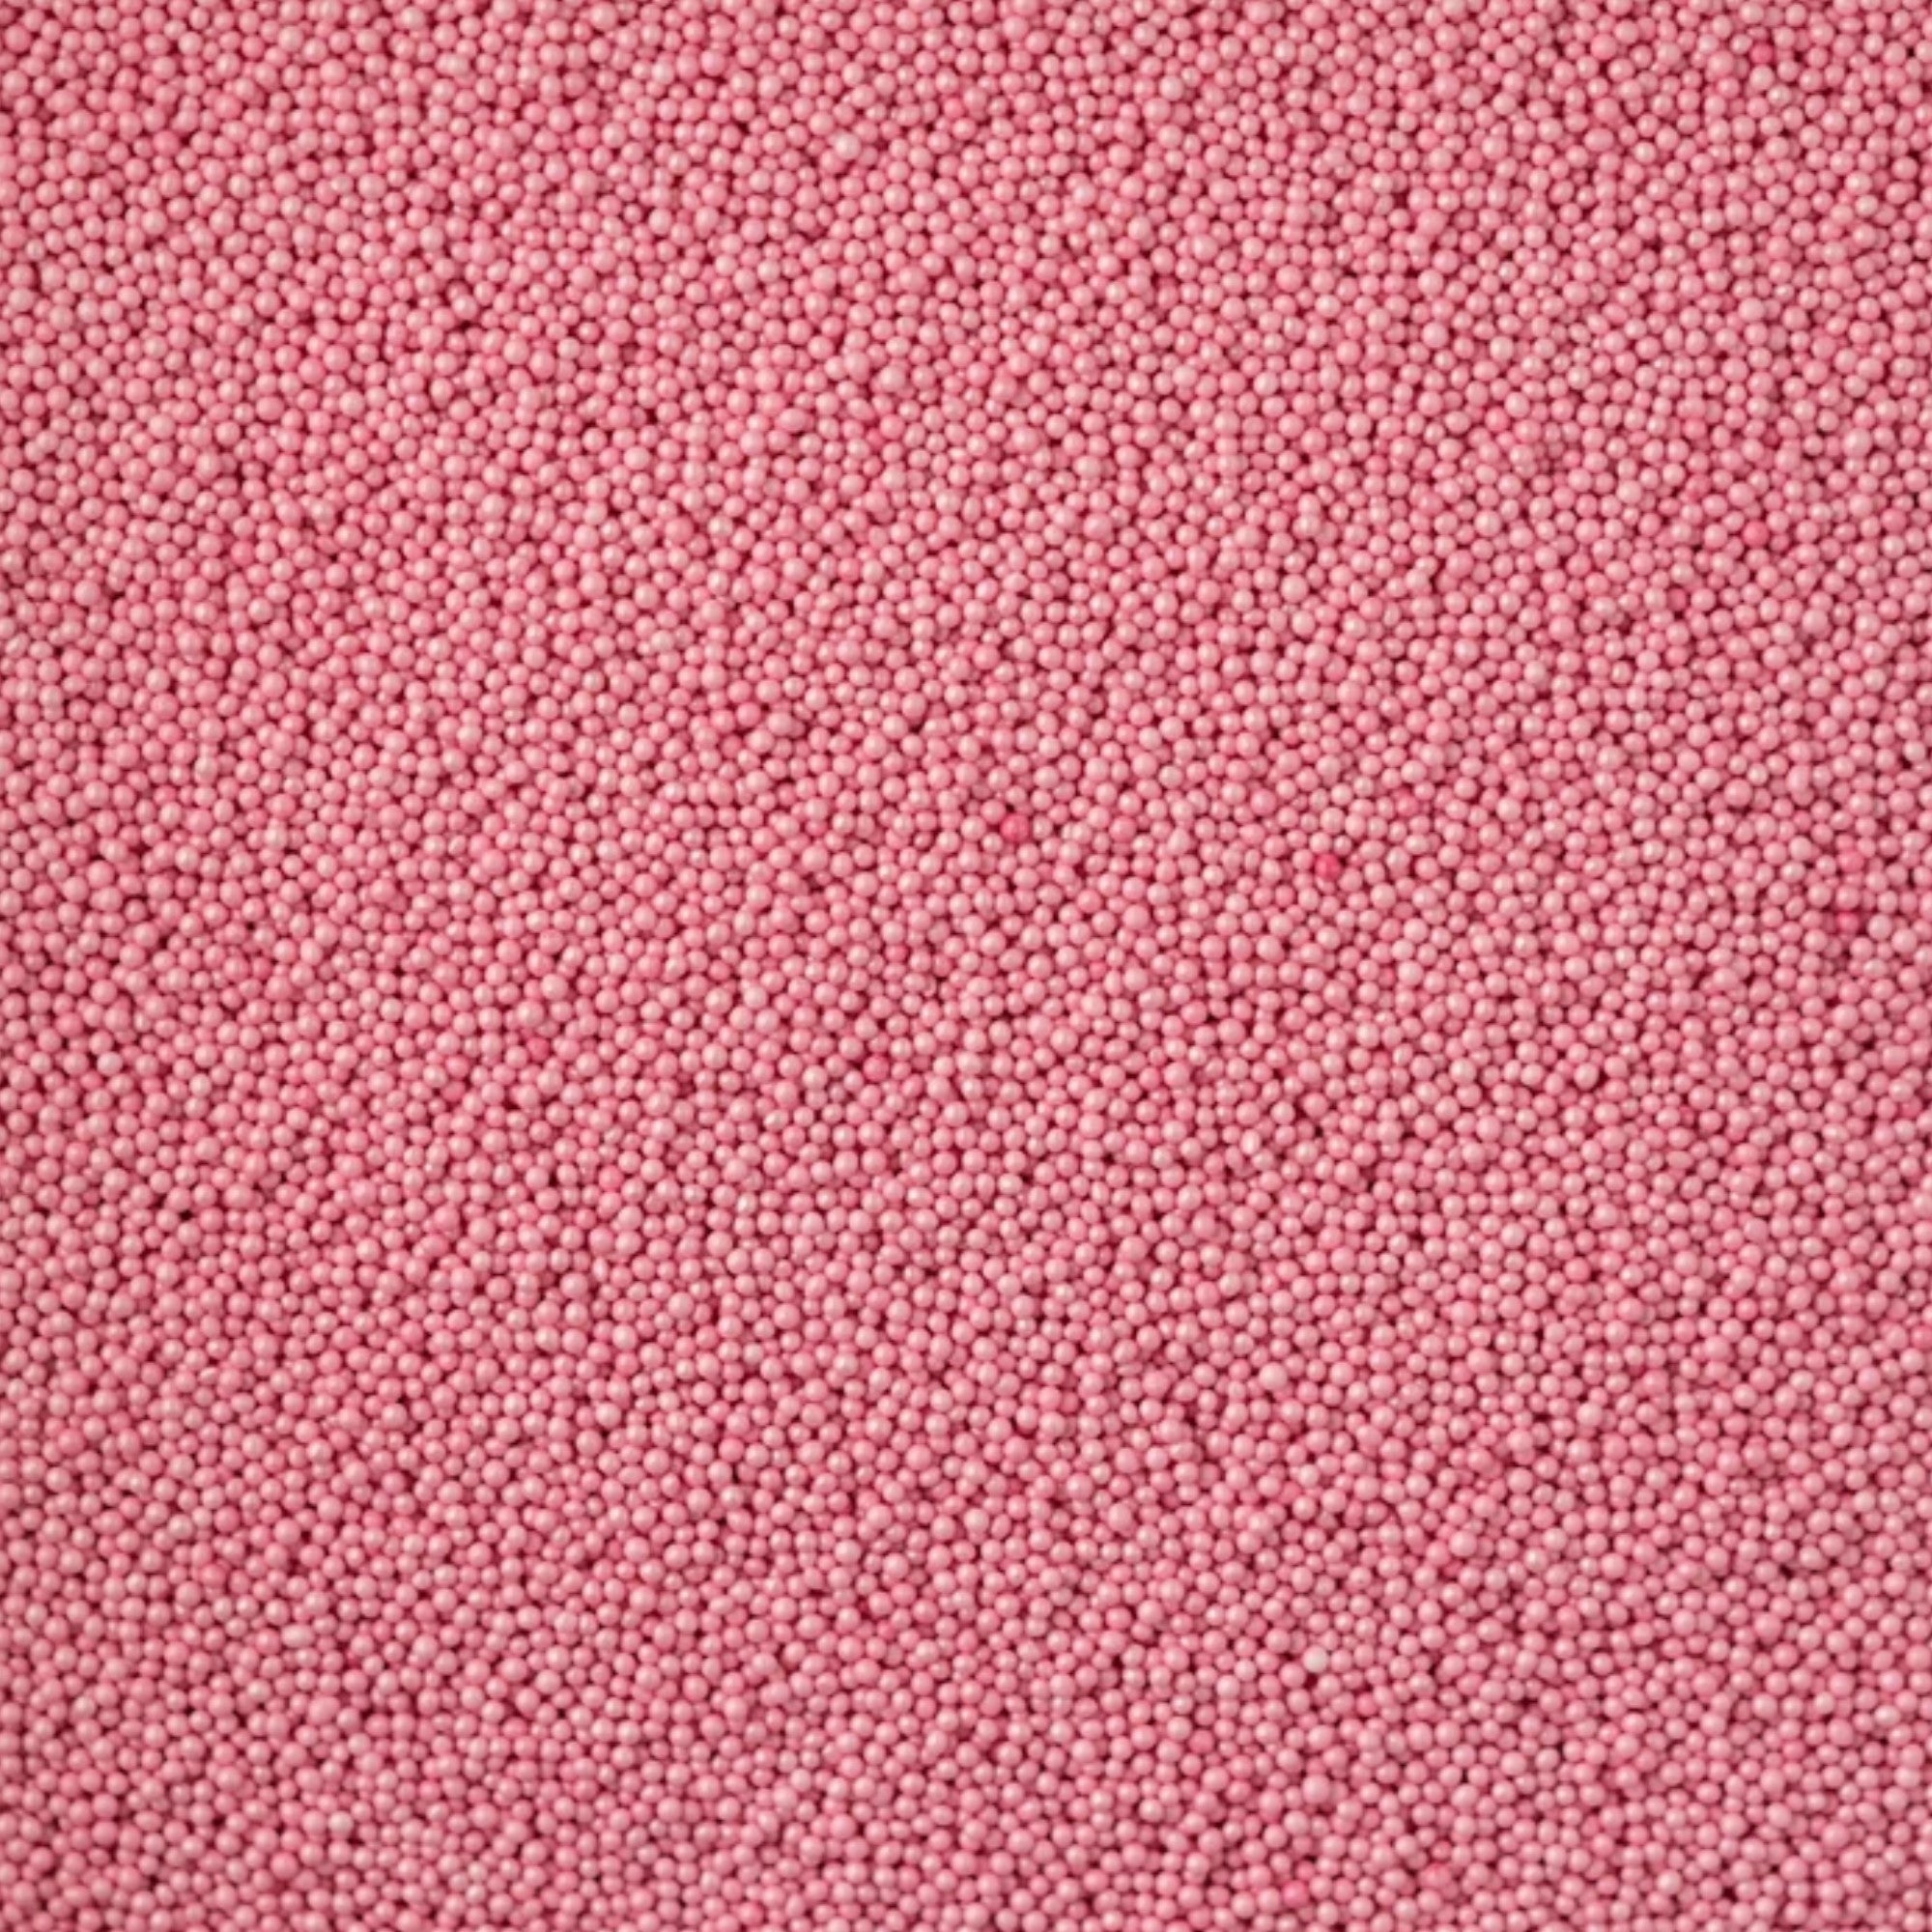 Pink Glimmer 100s & 1000s Cupcake / Cake Decoration Sprinkles Toppers